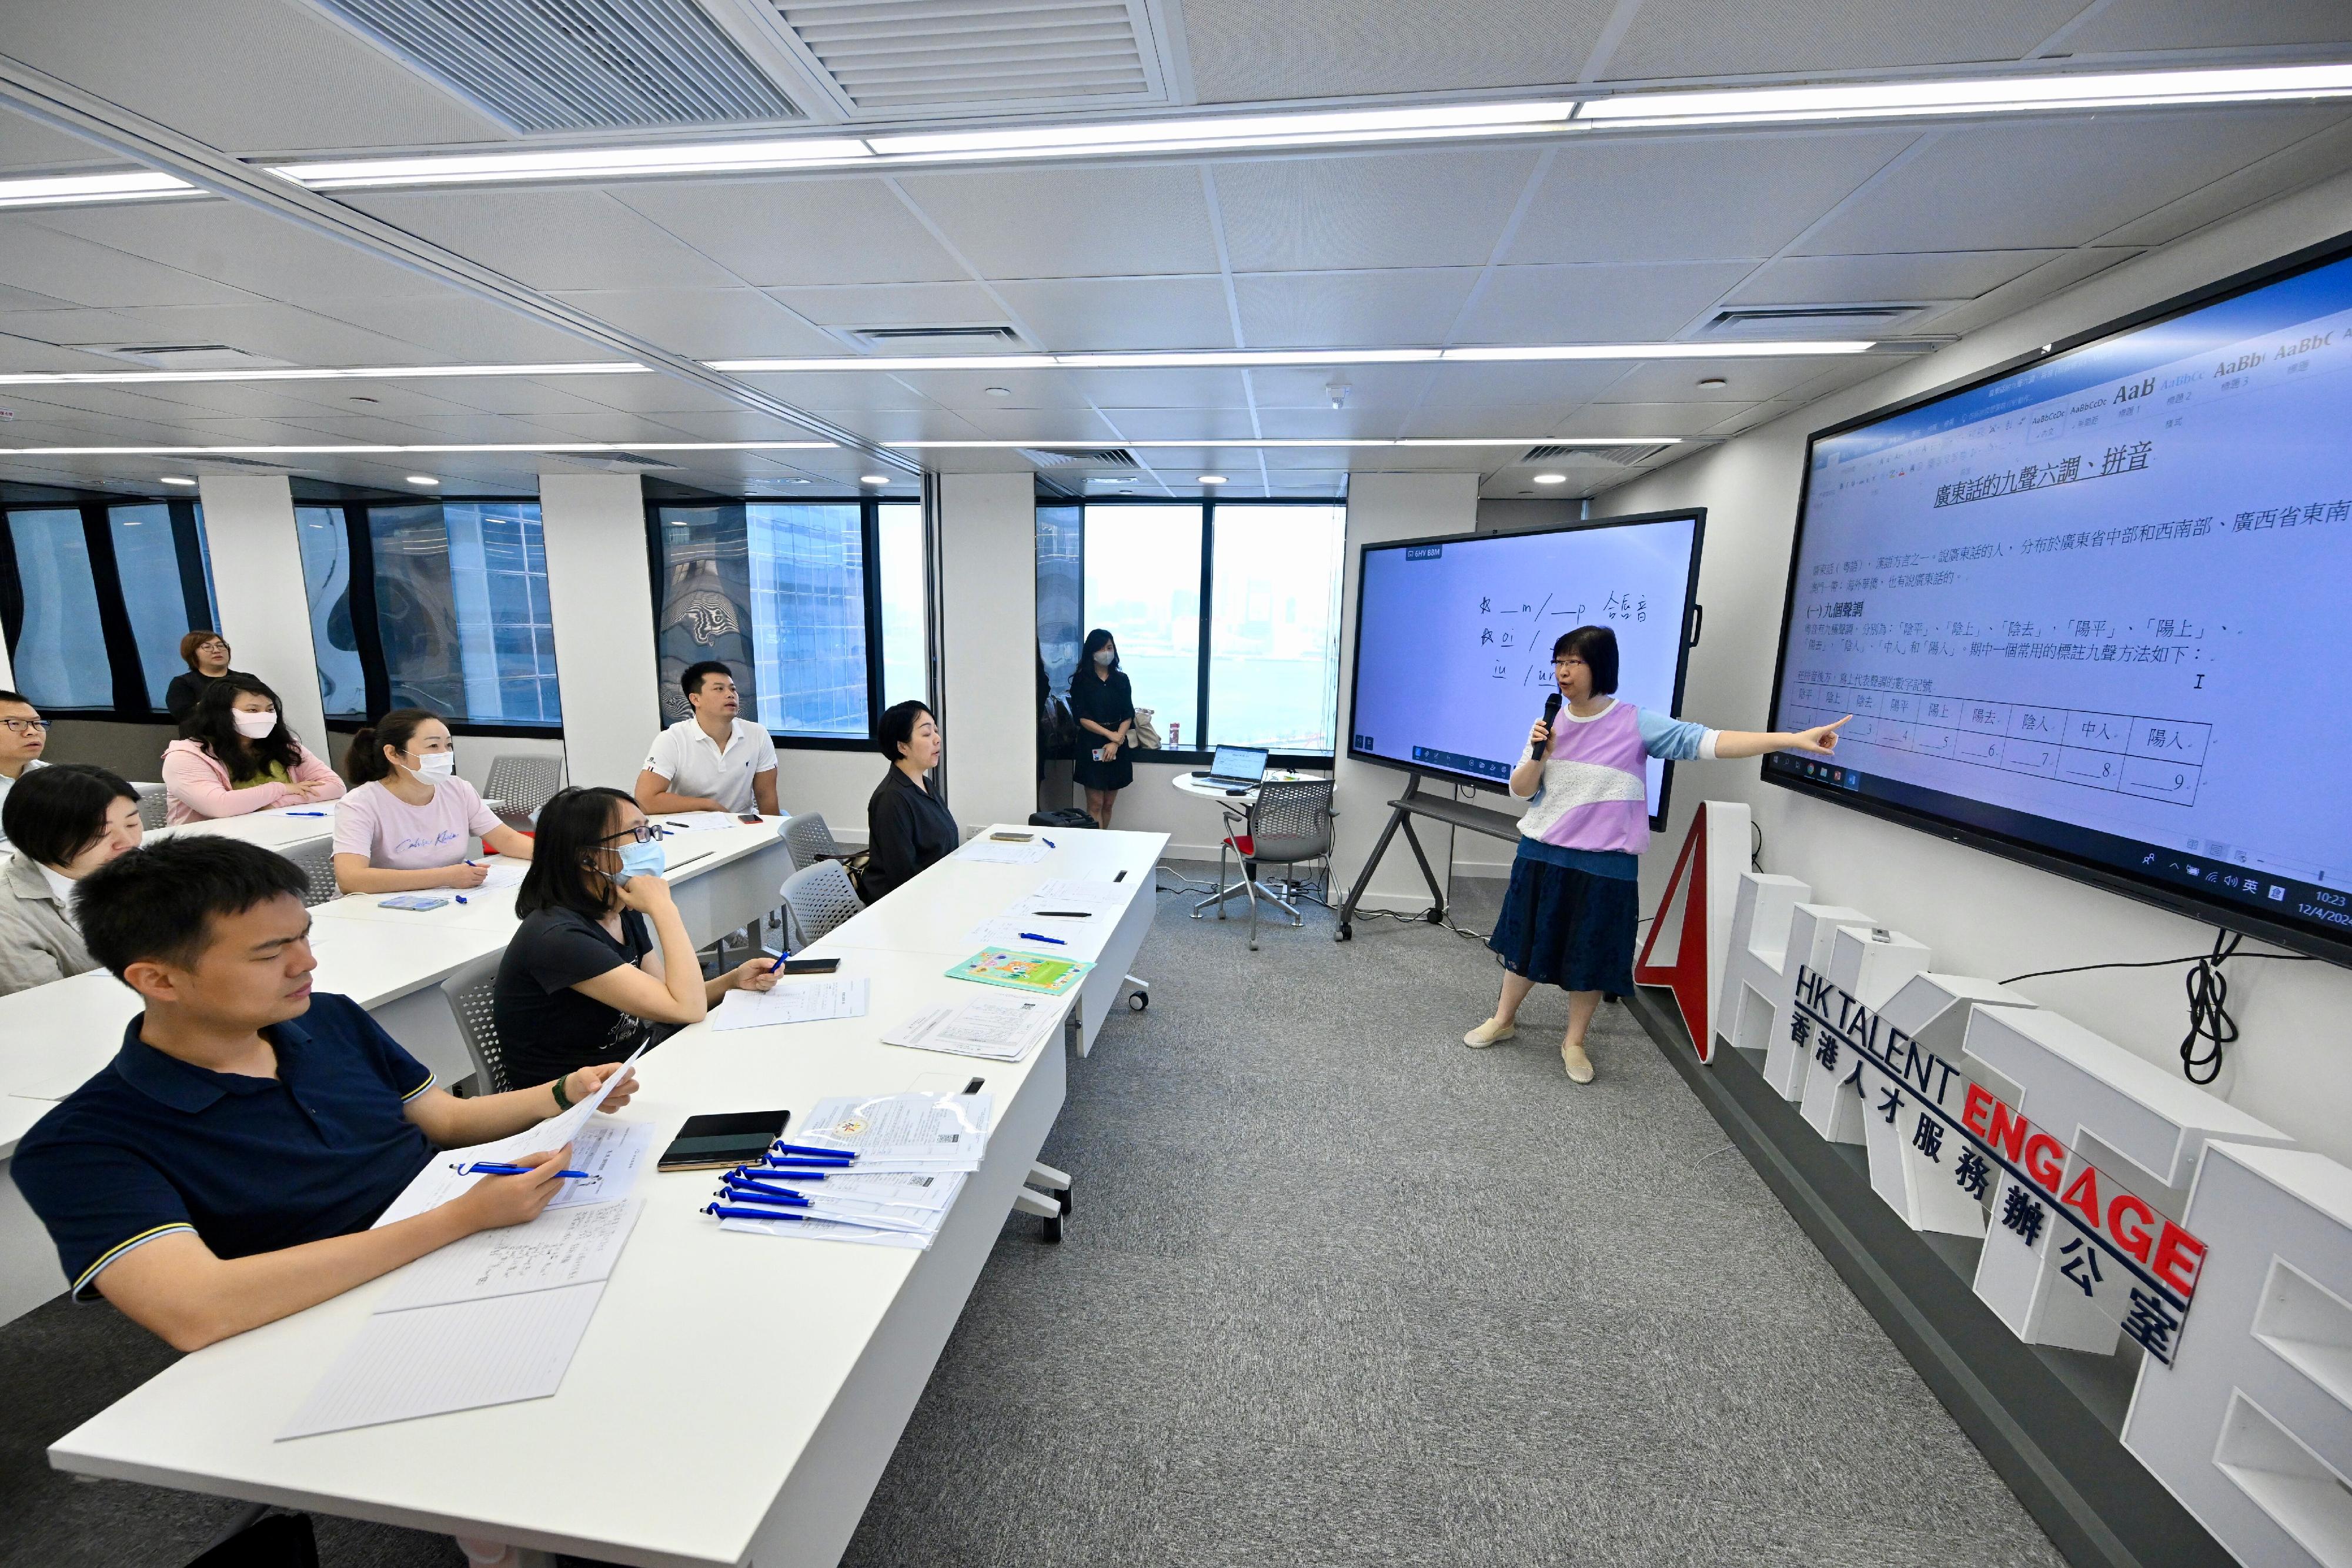 A spokesman for Hong Kong Talent Engage (HKTE) today (April 12) said that Cantonese classes had been held for talent who have arrived in the city to assist them to integrate into the community. The first two junior Cantonese classes were held on April 10 and today in HKTE, 12/F, Revenue Tower, Wan Chai. Instructors arranged by designated partners introduced Cantonese knowledge to new arrivals. Oral communication training was provided for them to master the daily application and basic skills.